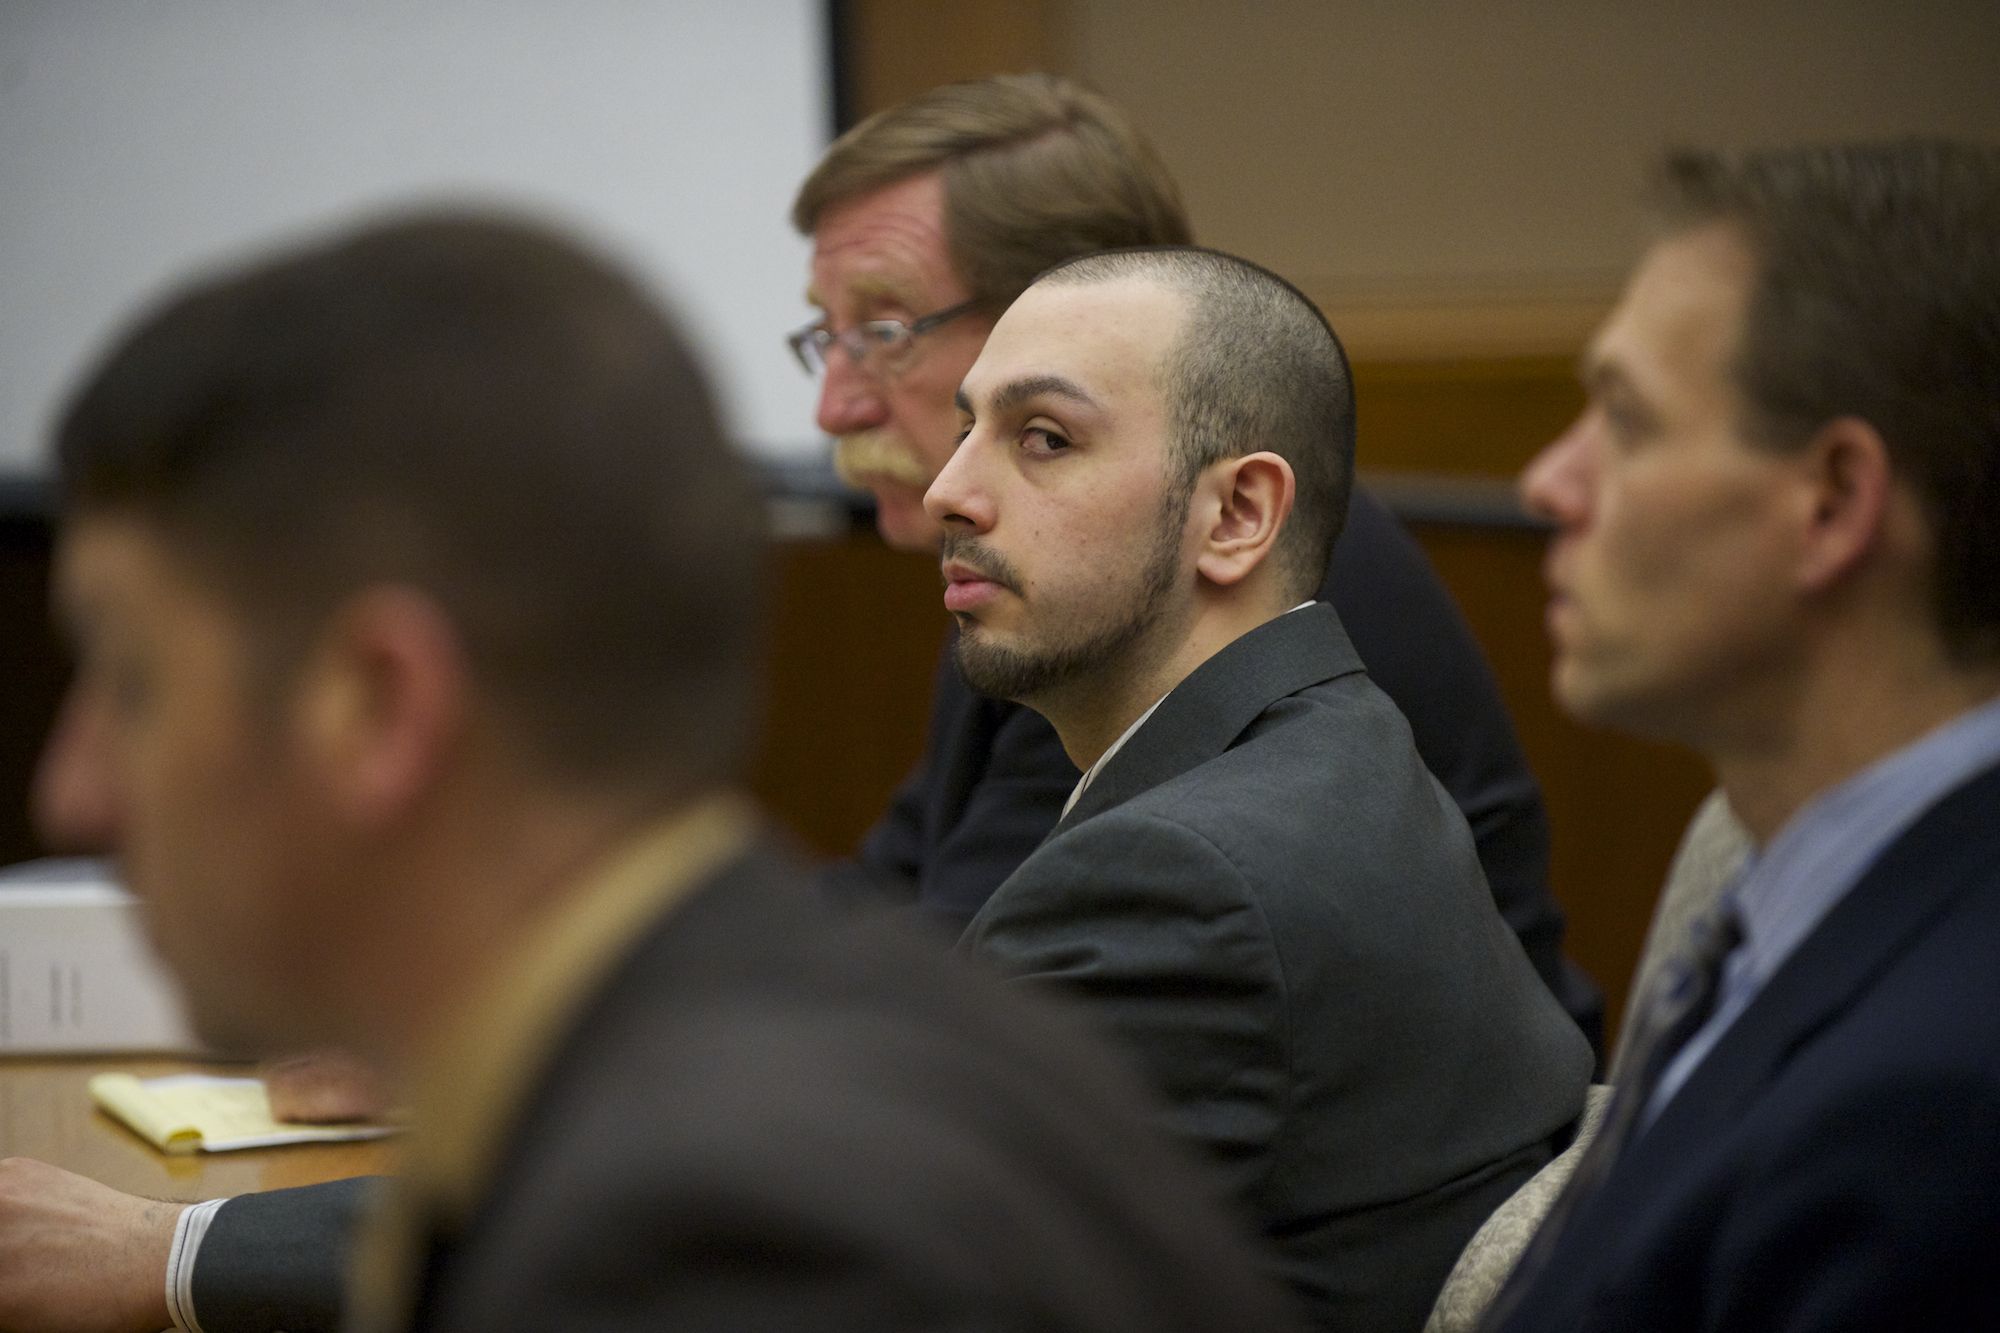 Closing arguments were heard Tuesday in the trial of Pedro &quot;Junior&quot; Godinez Jr. in Clark County Superior Court. Godinez, 20, is on trial for allegedly kidnapping, robbing and repeatedly shooting Freddie Landstrom, 39, of Beaverton, Ore., on Nov.